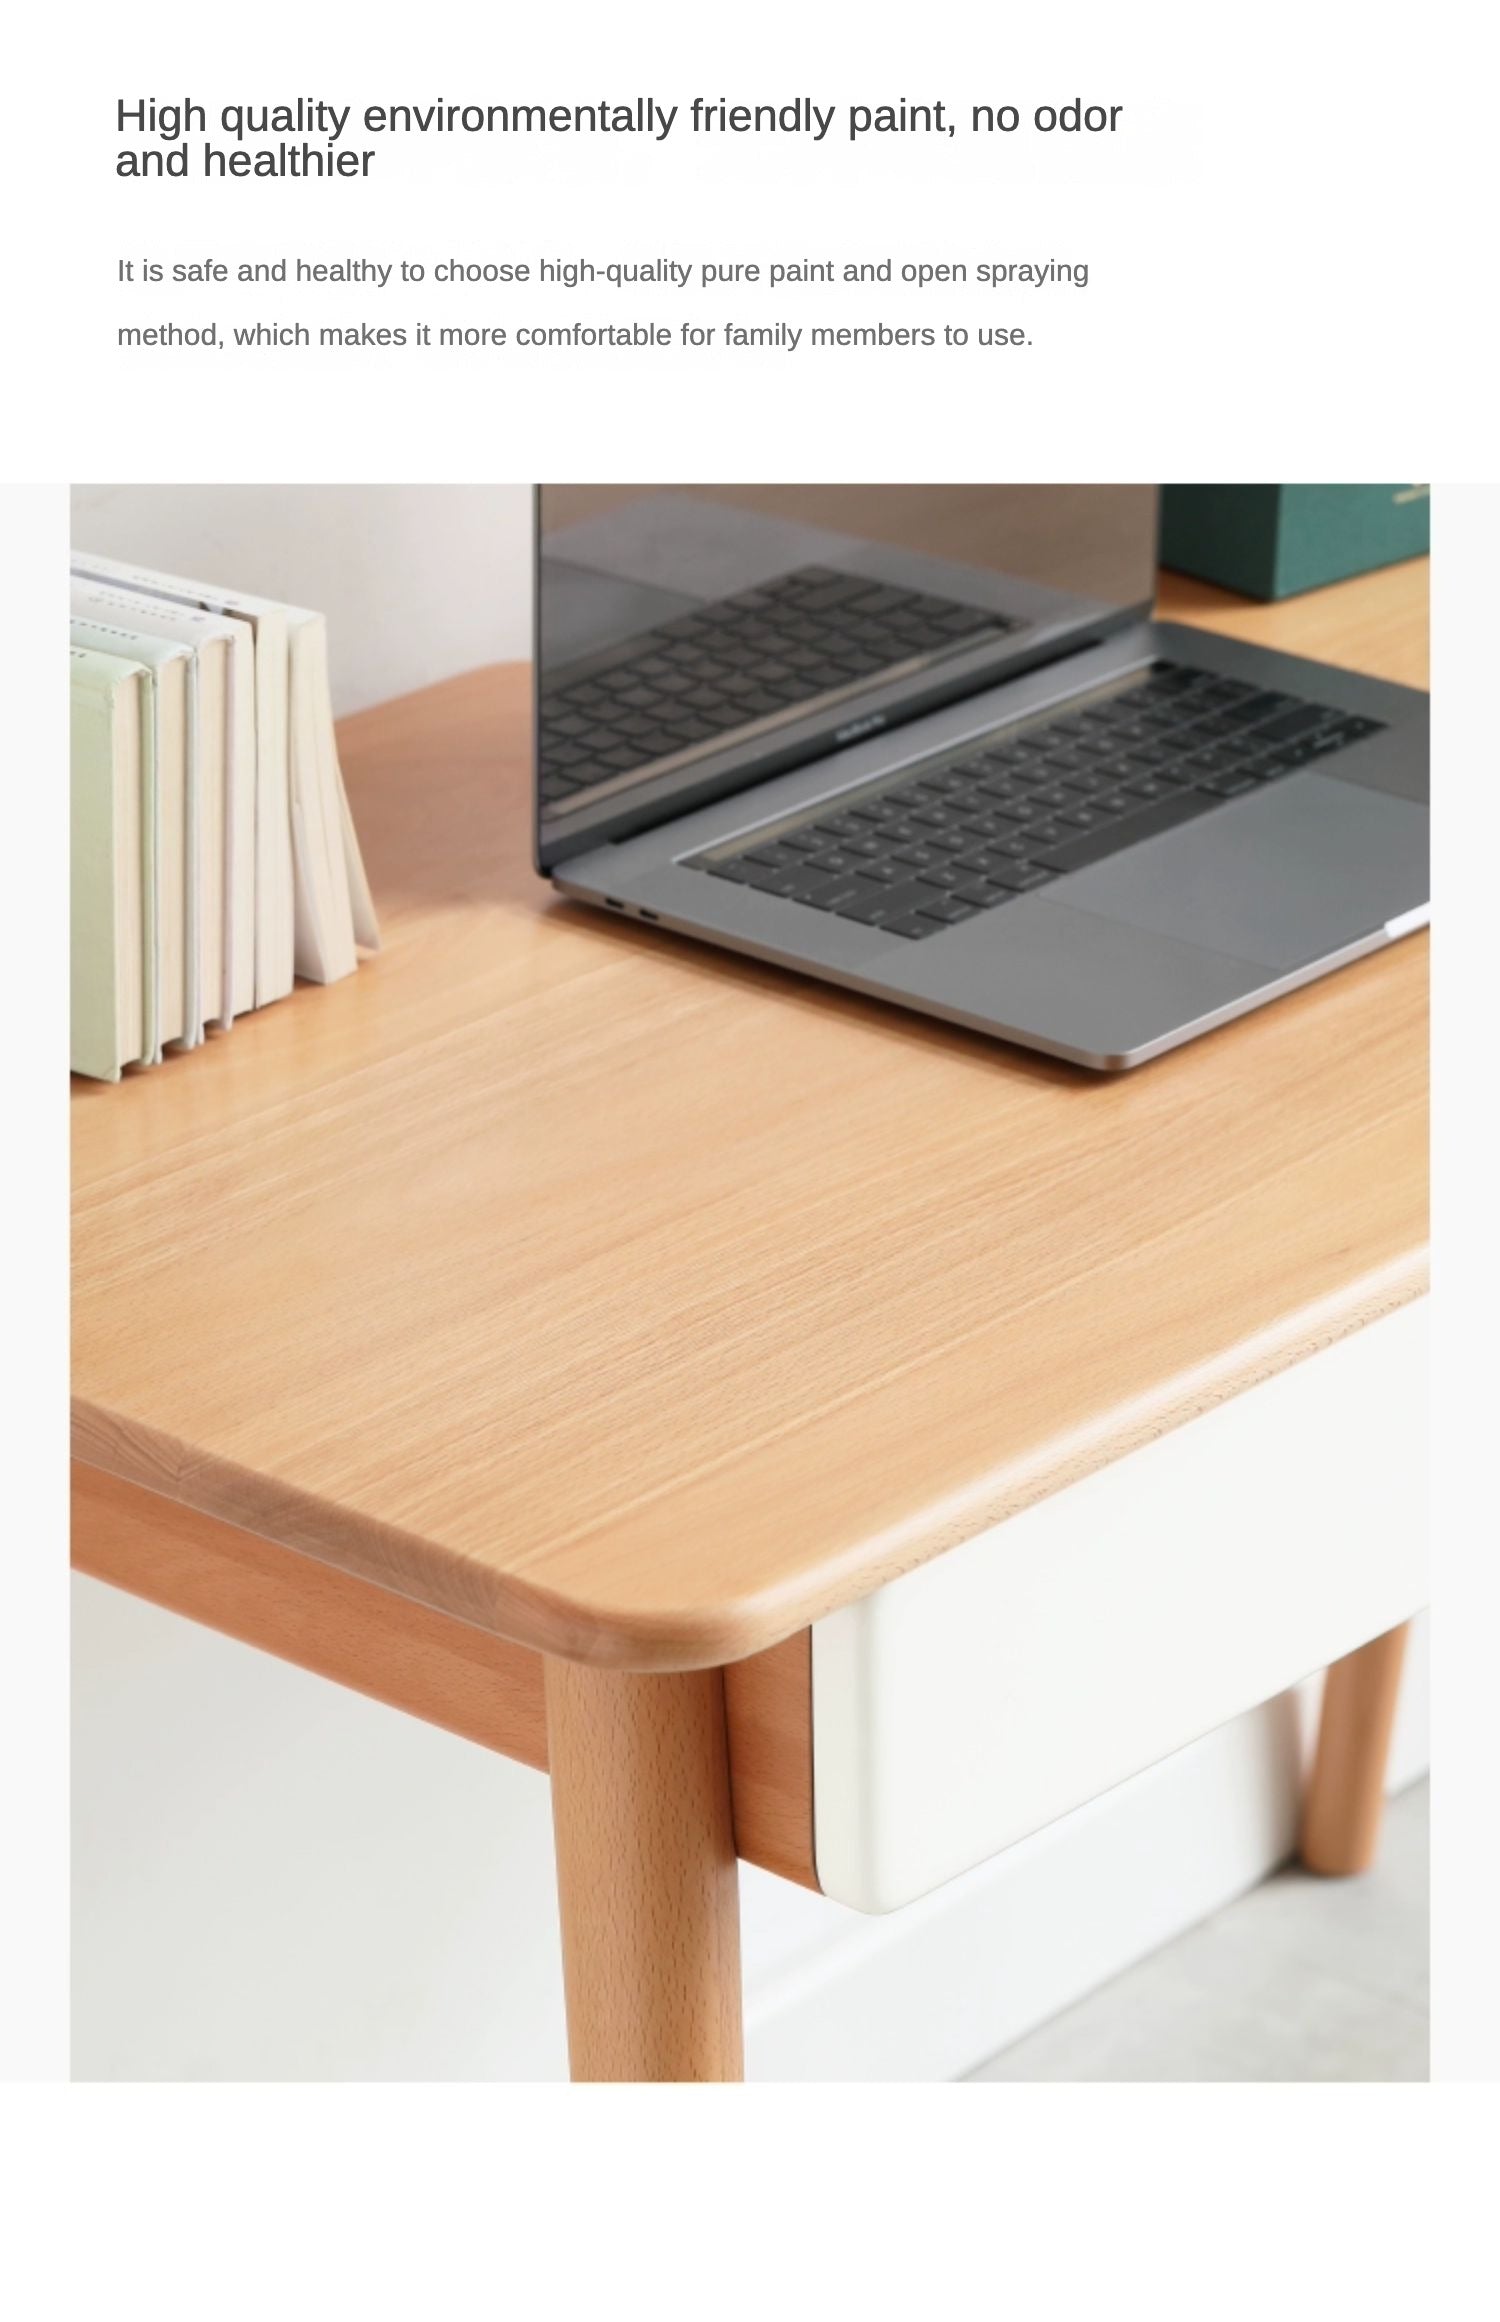 Beech solid wood office desk with drawer_